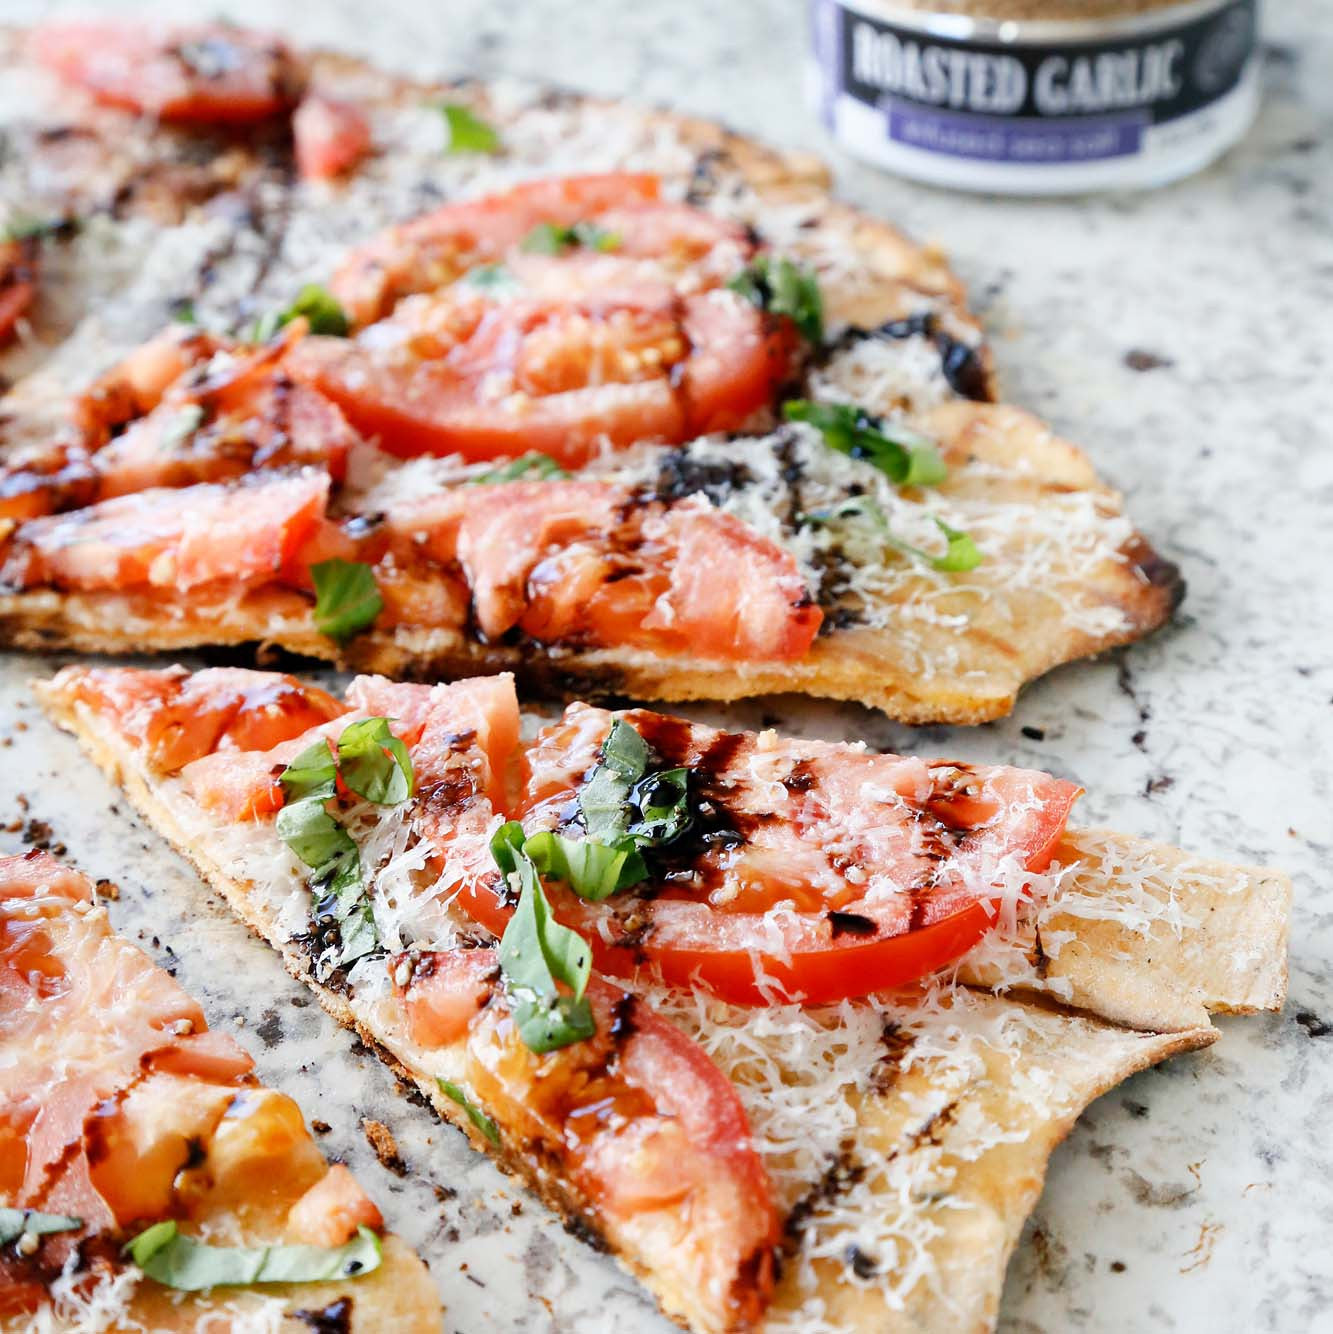 Roasted Garlic Tomato Basil Pizza made with Wild Garlic Pizza Dough, Basil Olive Oil, pecorino cheese, tomatoes, basil and Roasted Garlic Sea Sea Salt served on a marble platter.